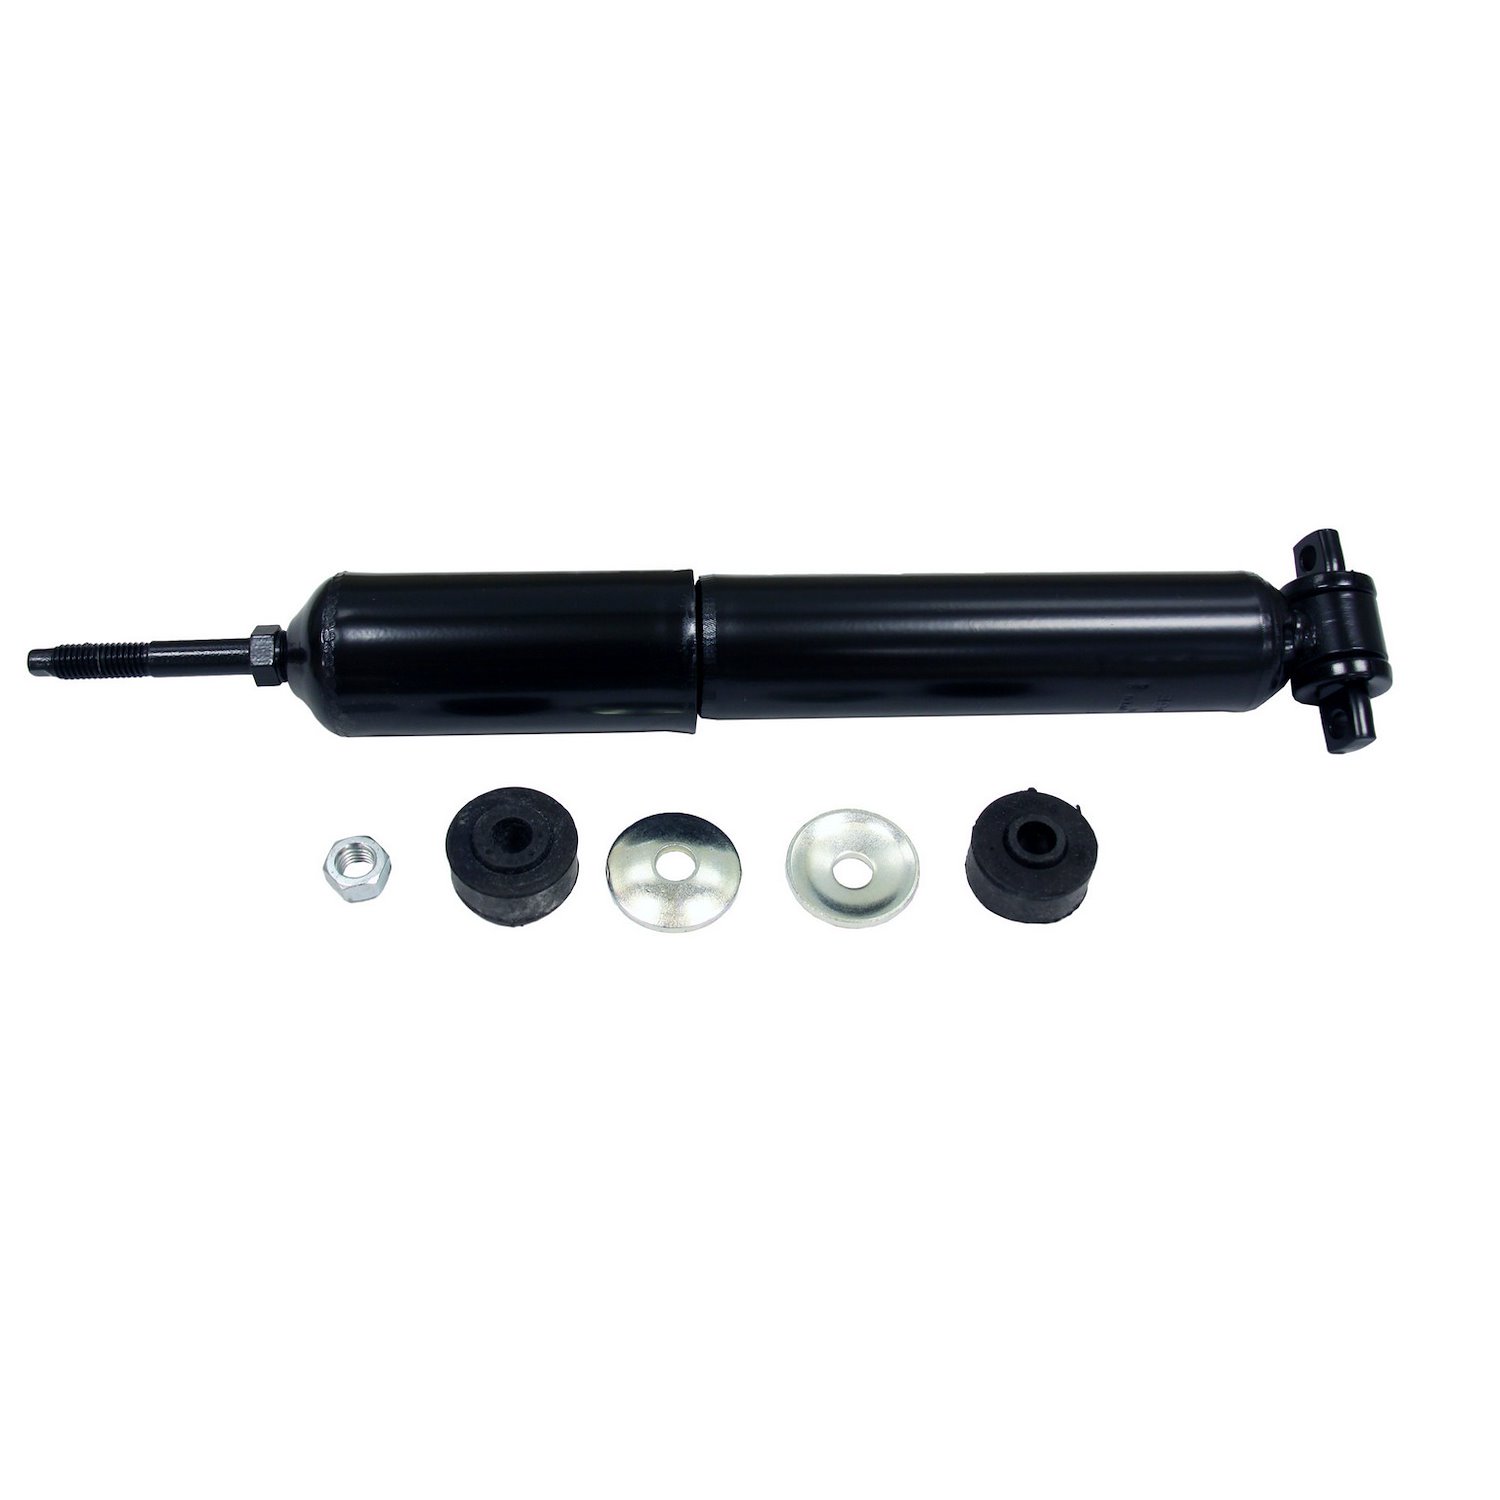 OESpectrum Front Shock Absorber for 1999-2004 Chevy Silverado,